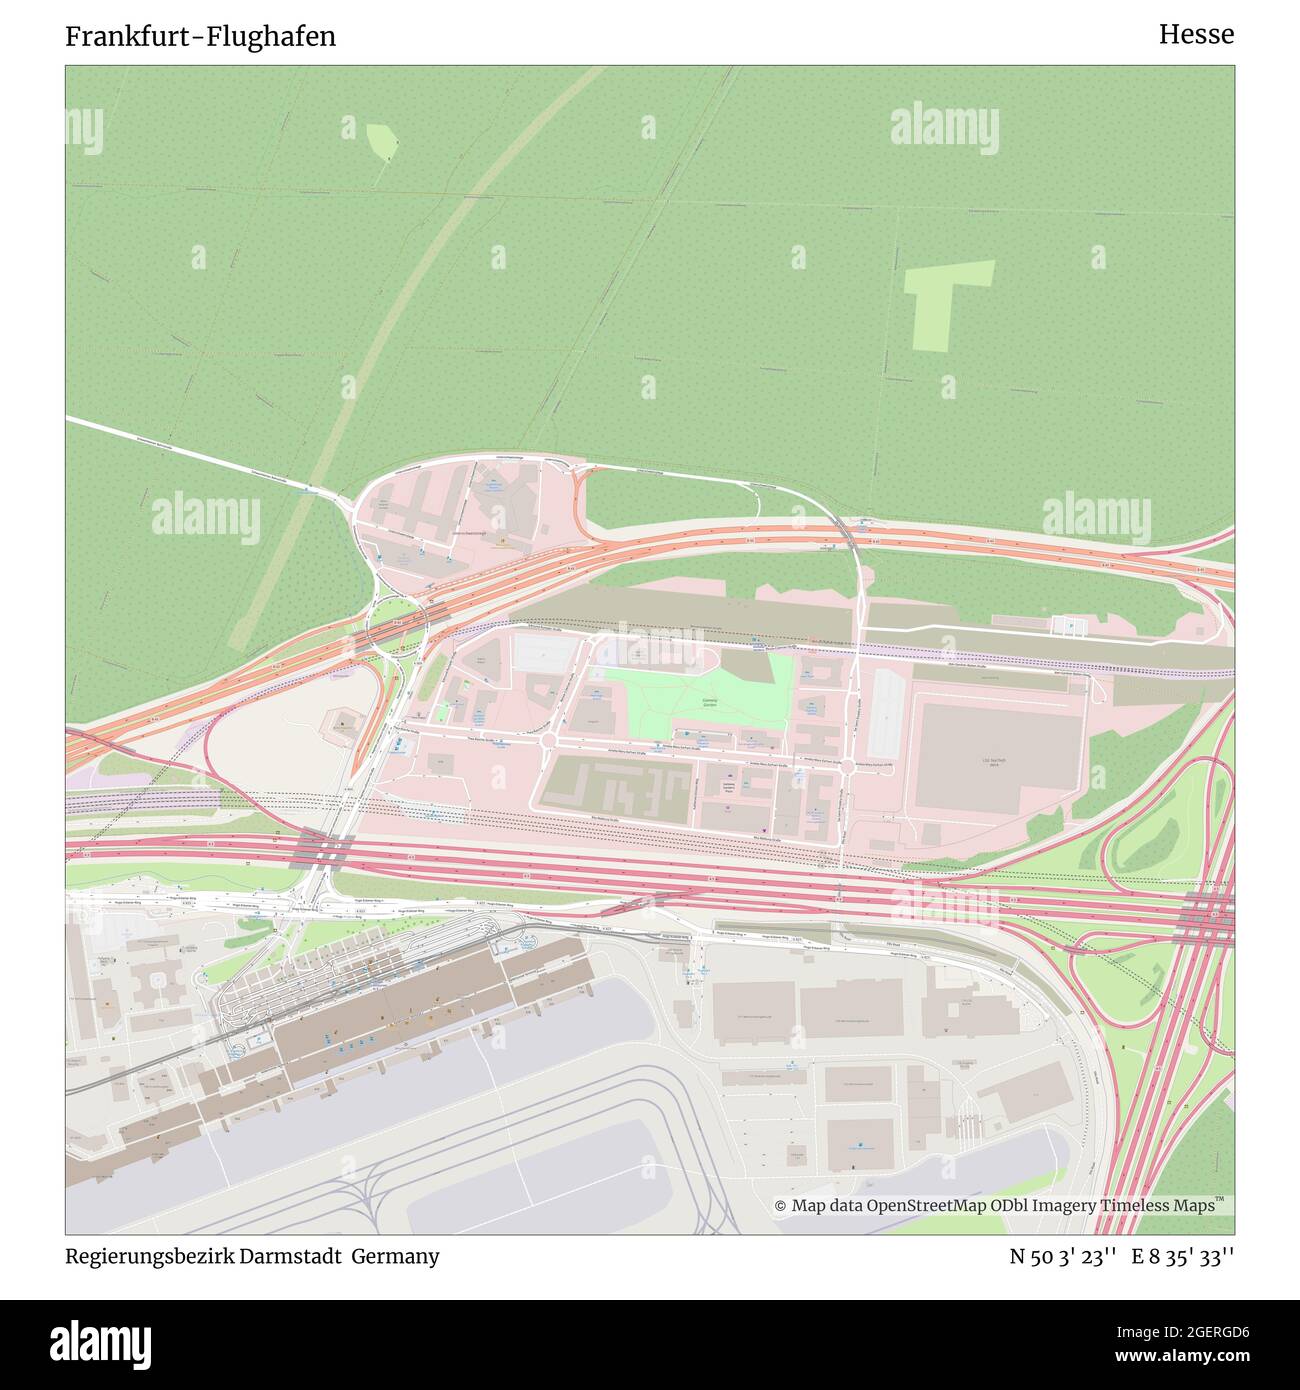 Frankfurt-Flughafen, Regierungsbezirk Darmstadt, Germany, Hesse, N 50 3' 23'', E 8 35' 33'', map, Timeless Map published in 2021. Travelers, explorers and adventurers like Florence Nightingale, David Livingstone, Ernest Shackleton, Lewis and Clark and Sherlock Holmes relied on maps to plan travels to the world's most remote corners, Timeless Maps is mapping most locations on the globe, showing the achievement of great dreams Stock Photo